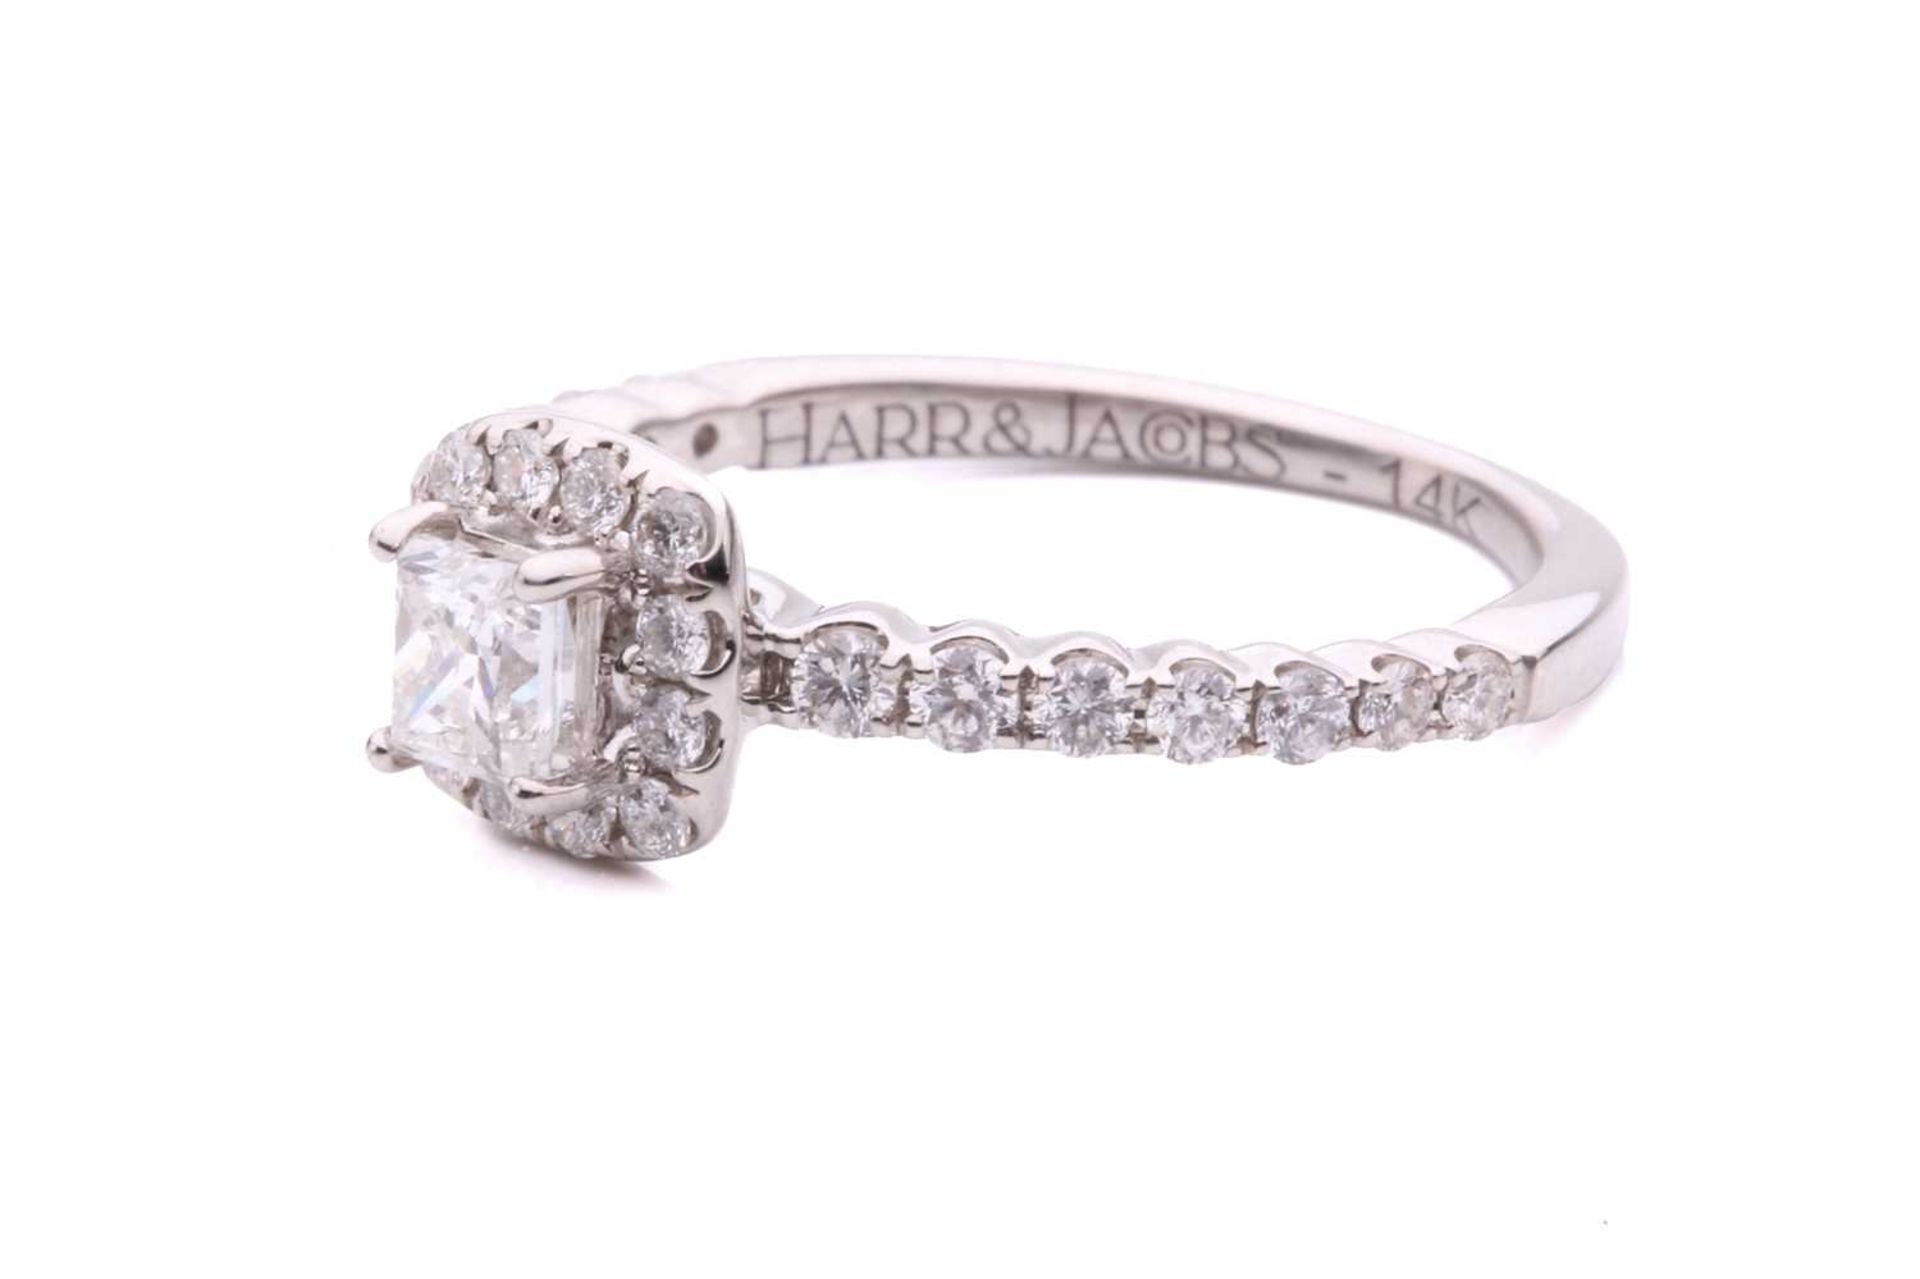 A princess-cut diamond halo ring, with a central claw set princess-cut diamond measuring 3.6x3.3mm - Image 2 of 5